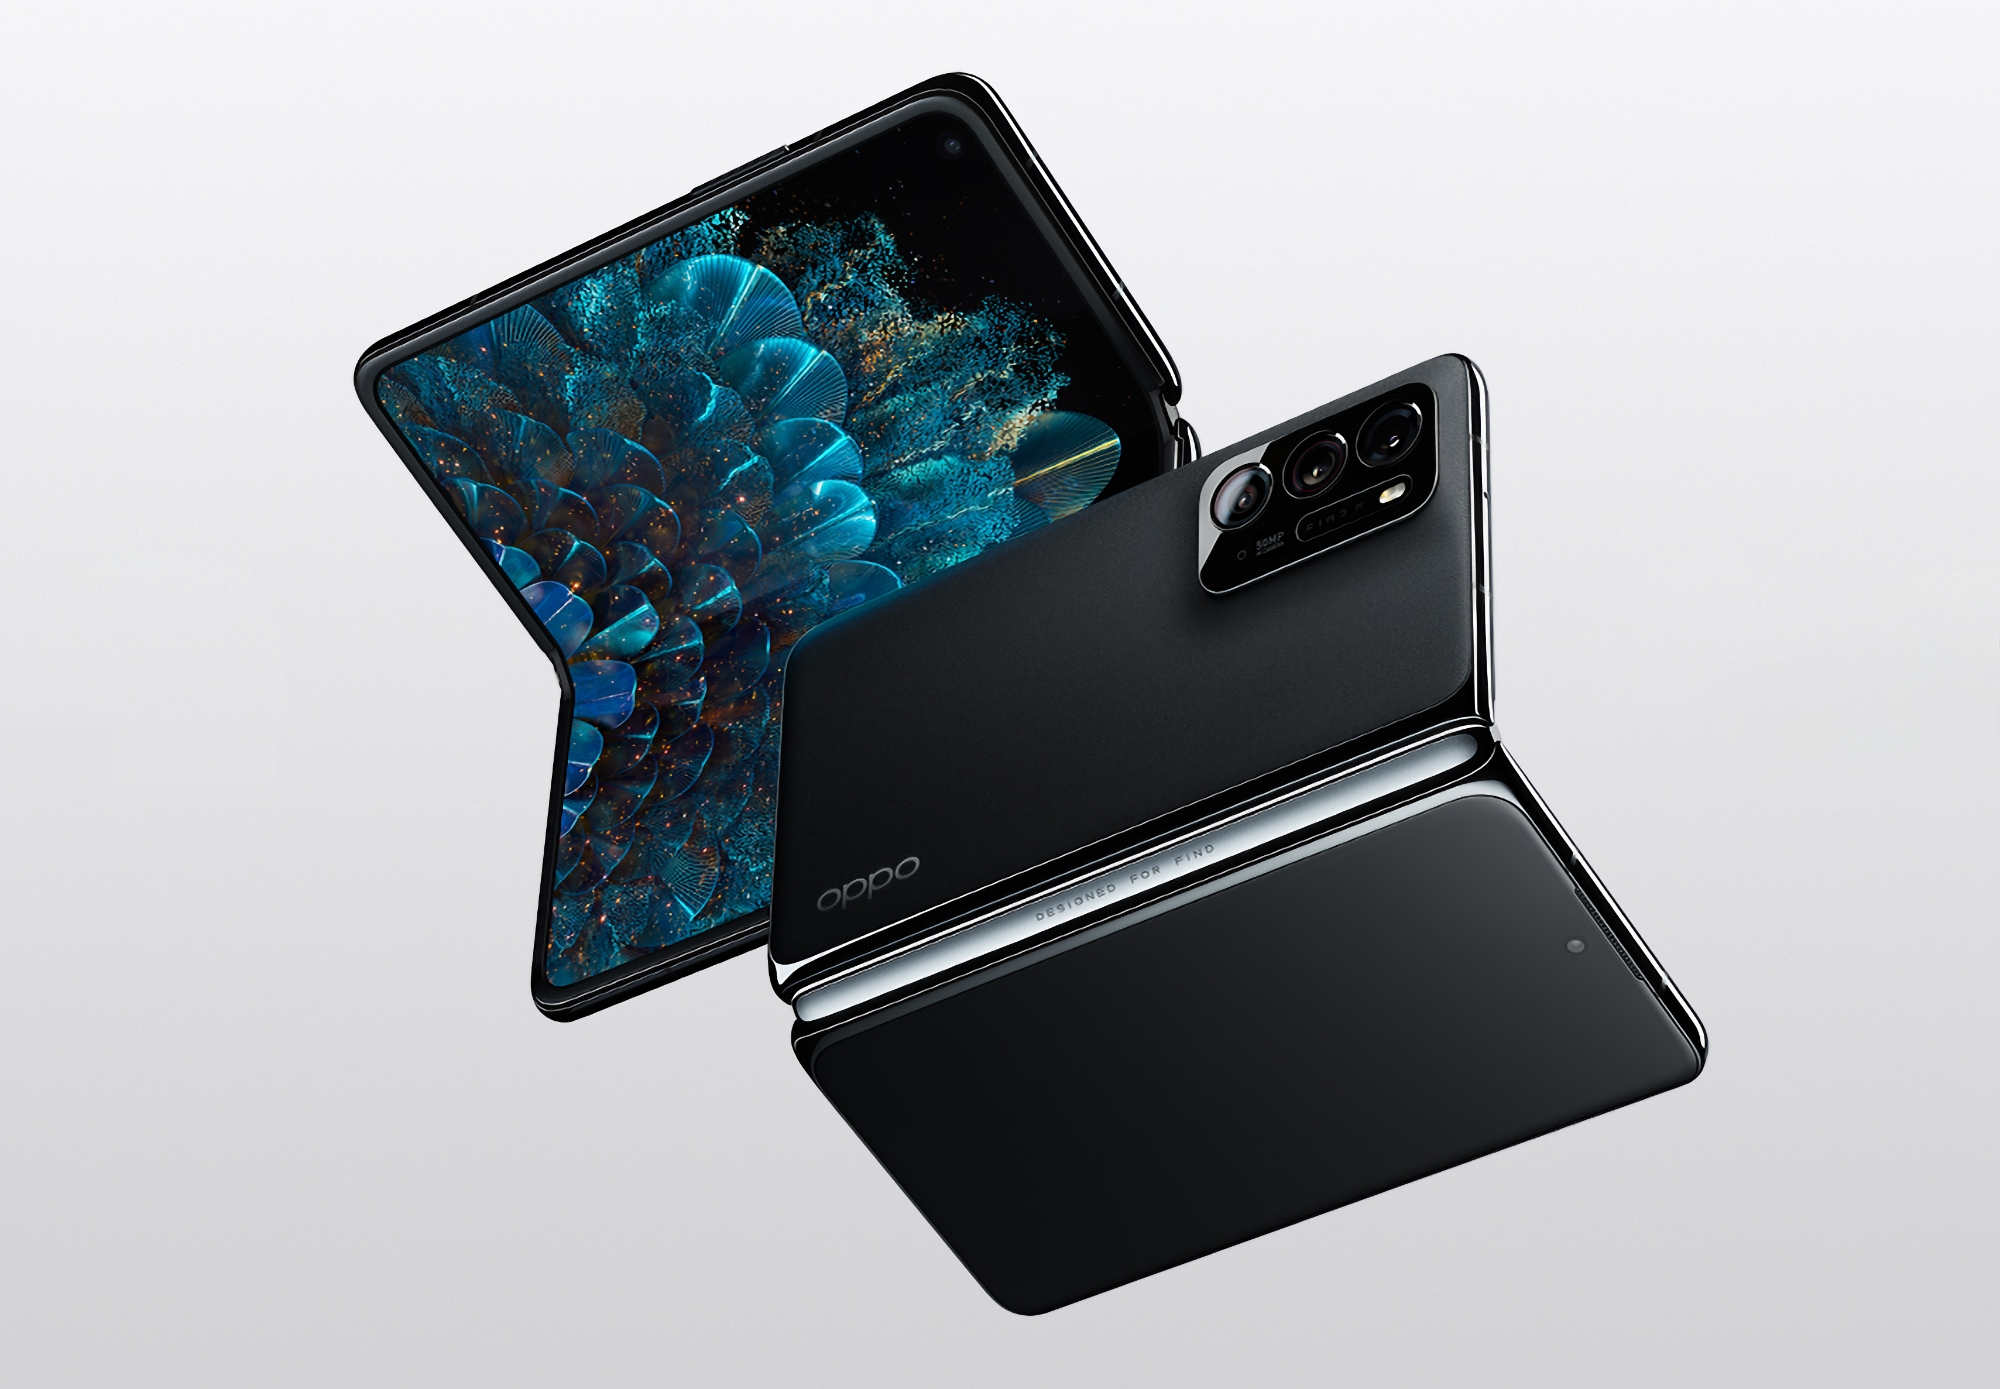 Two AMOLED screens at 120 Hz, Snapdragon 8+ Gen 1 chip and triple 50 MP camera: Insider revealed detailed specifications of foldable smartphone OPPO Find N2